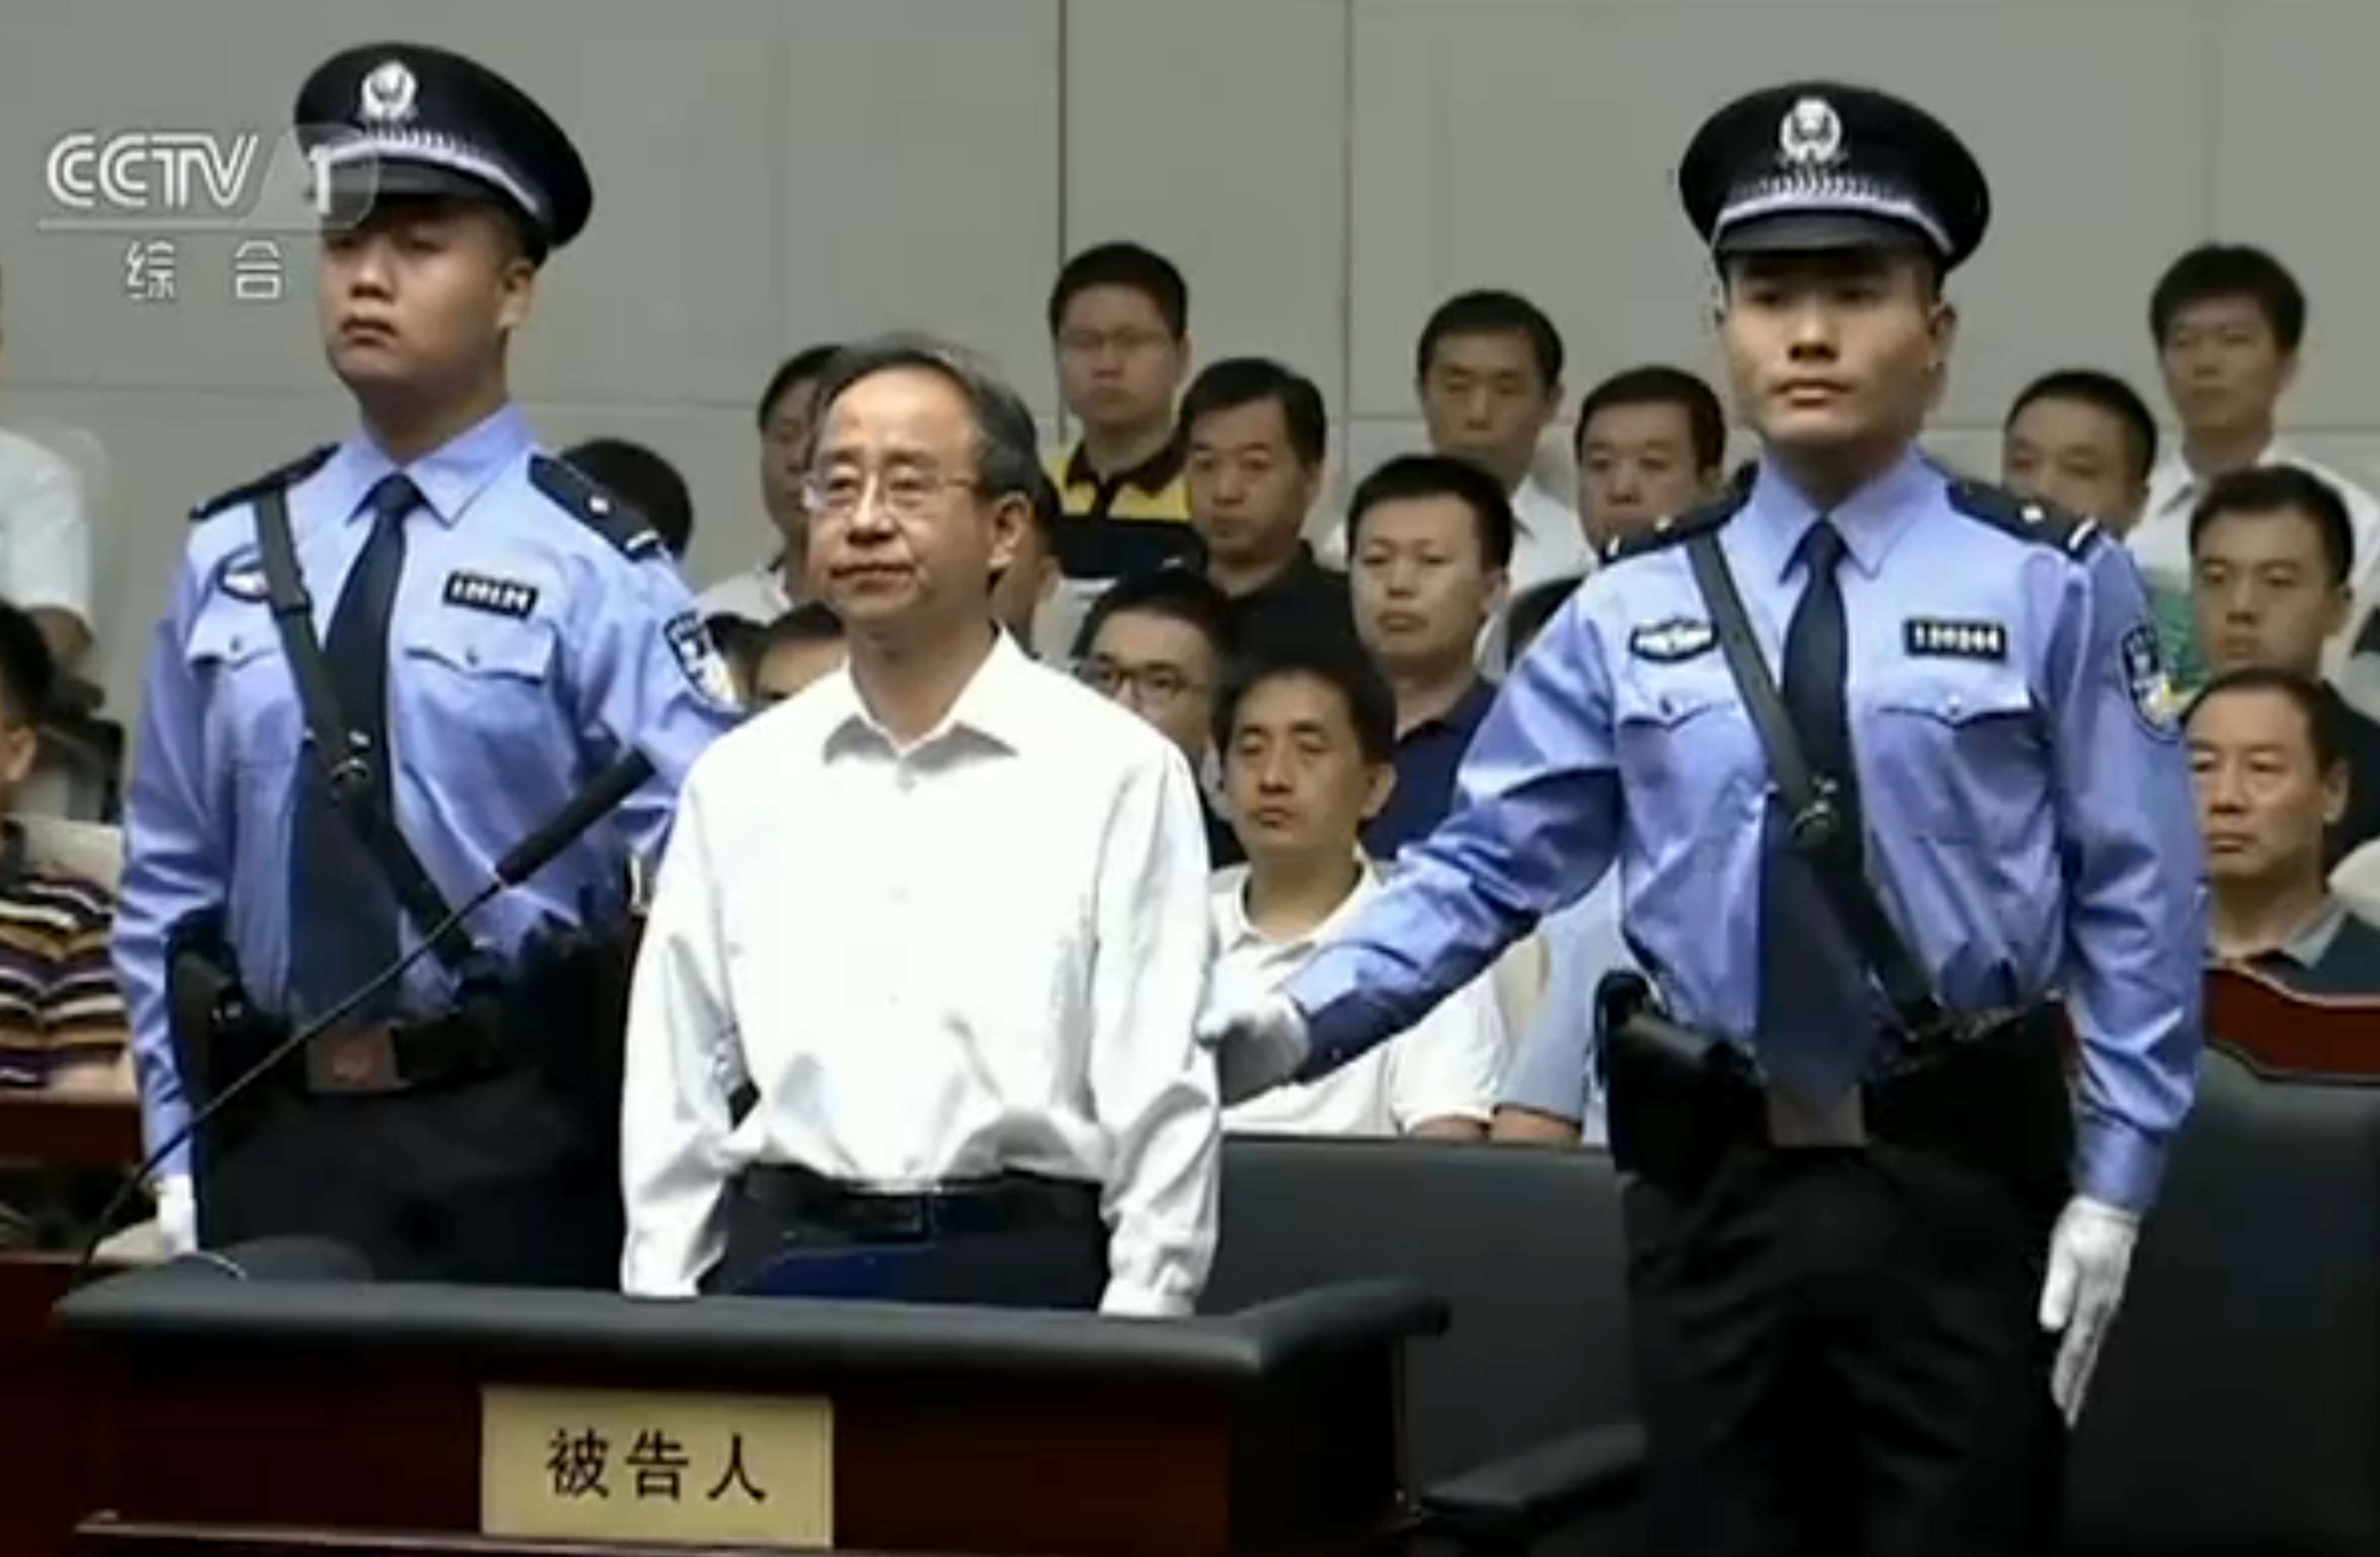 The purge began after Ling Jihua, who served former president Hu Jintao, fell under suspicion for corruption. He was jailed for life last month for bribery, among other crimes. Photo: SCMP Pictures